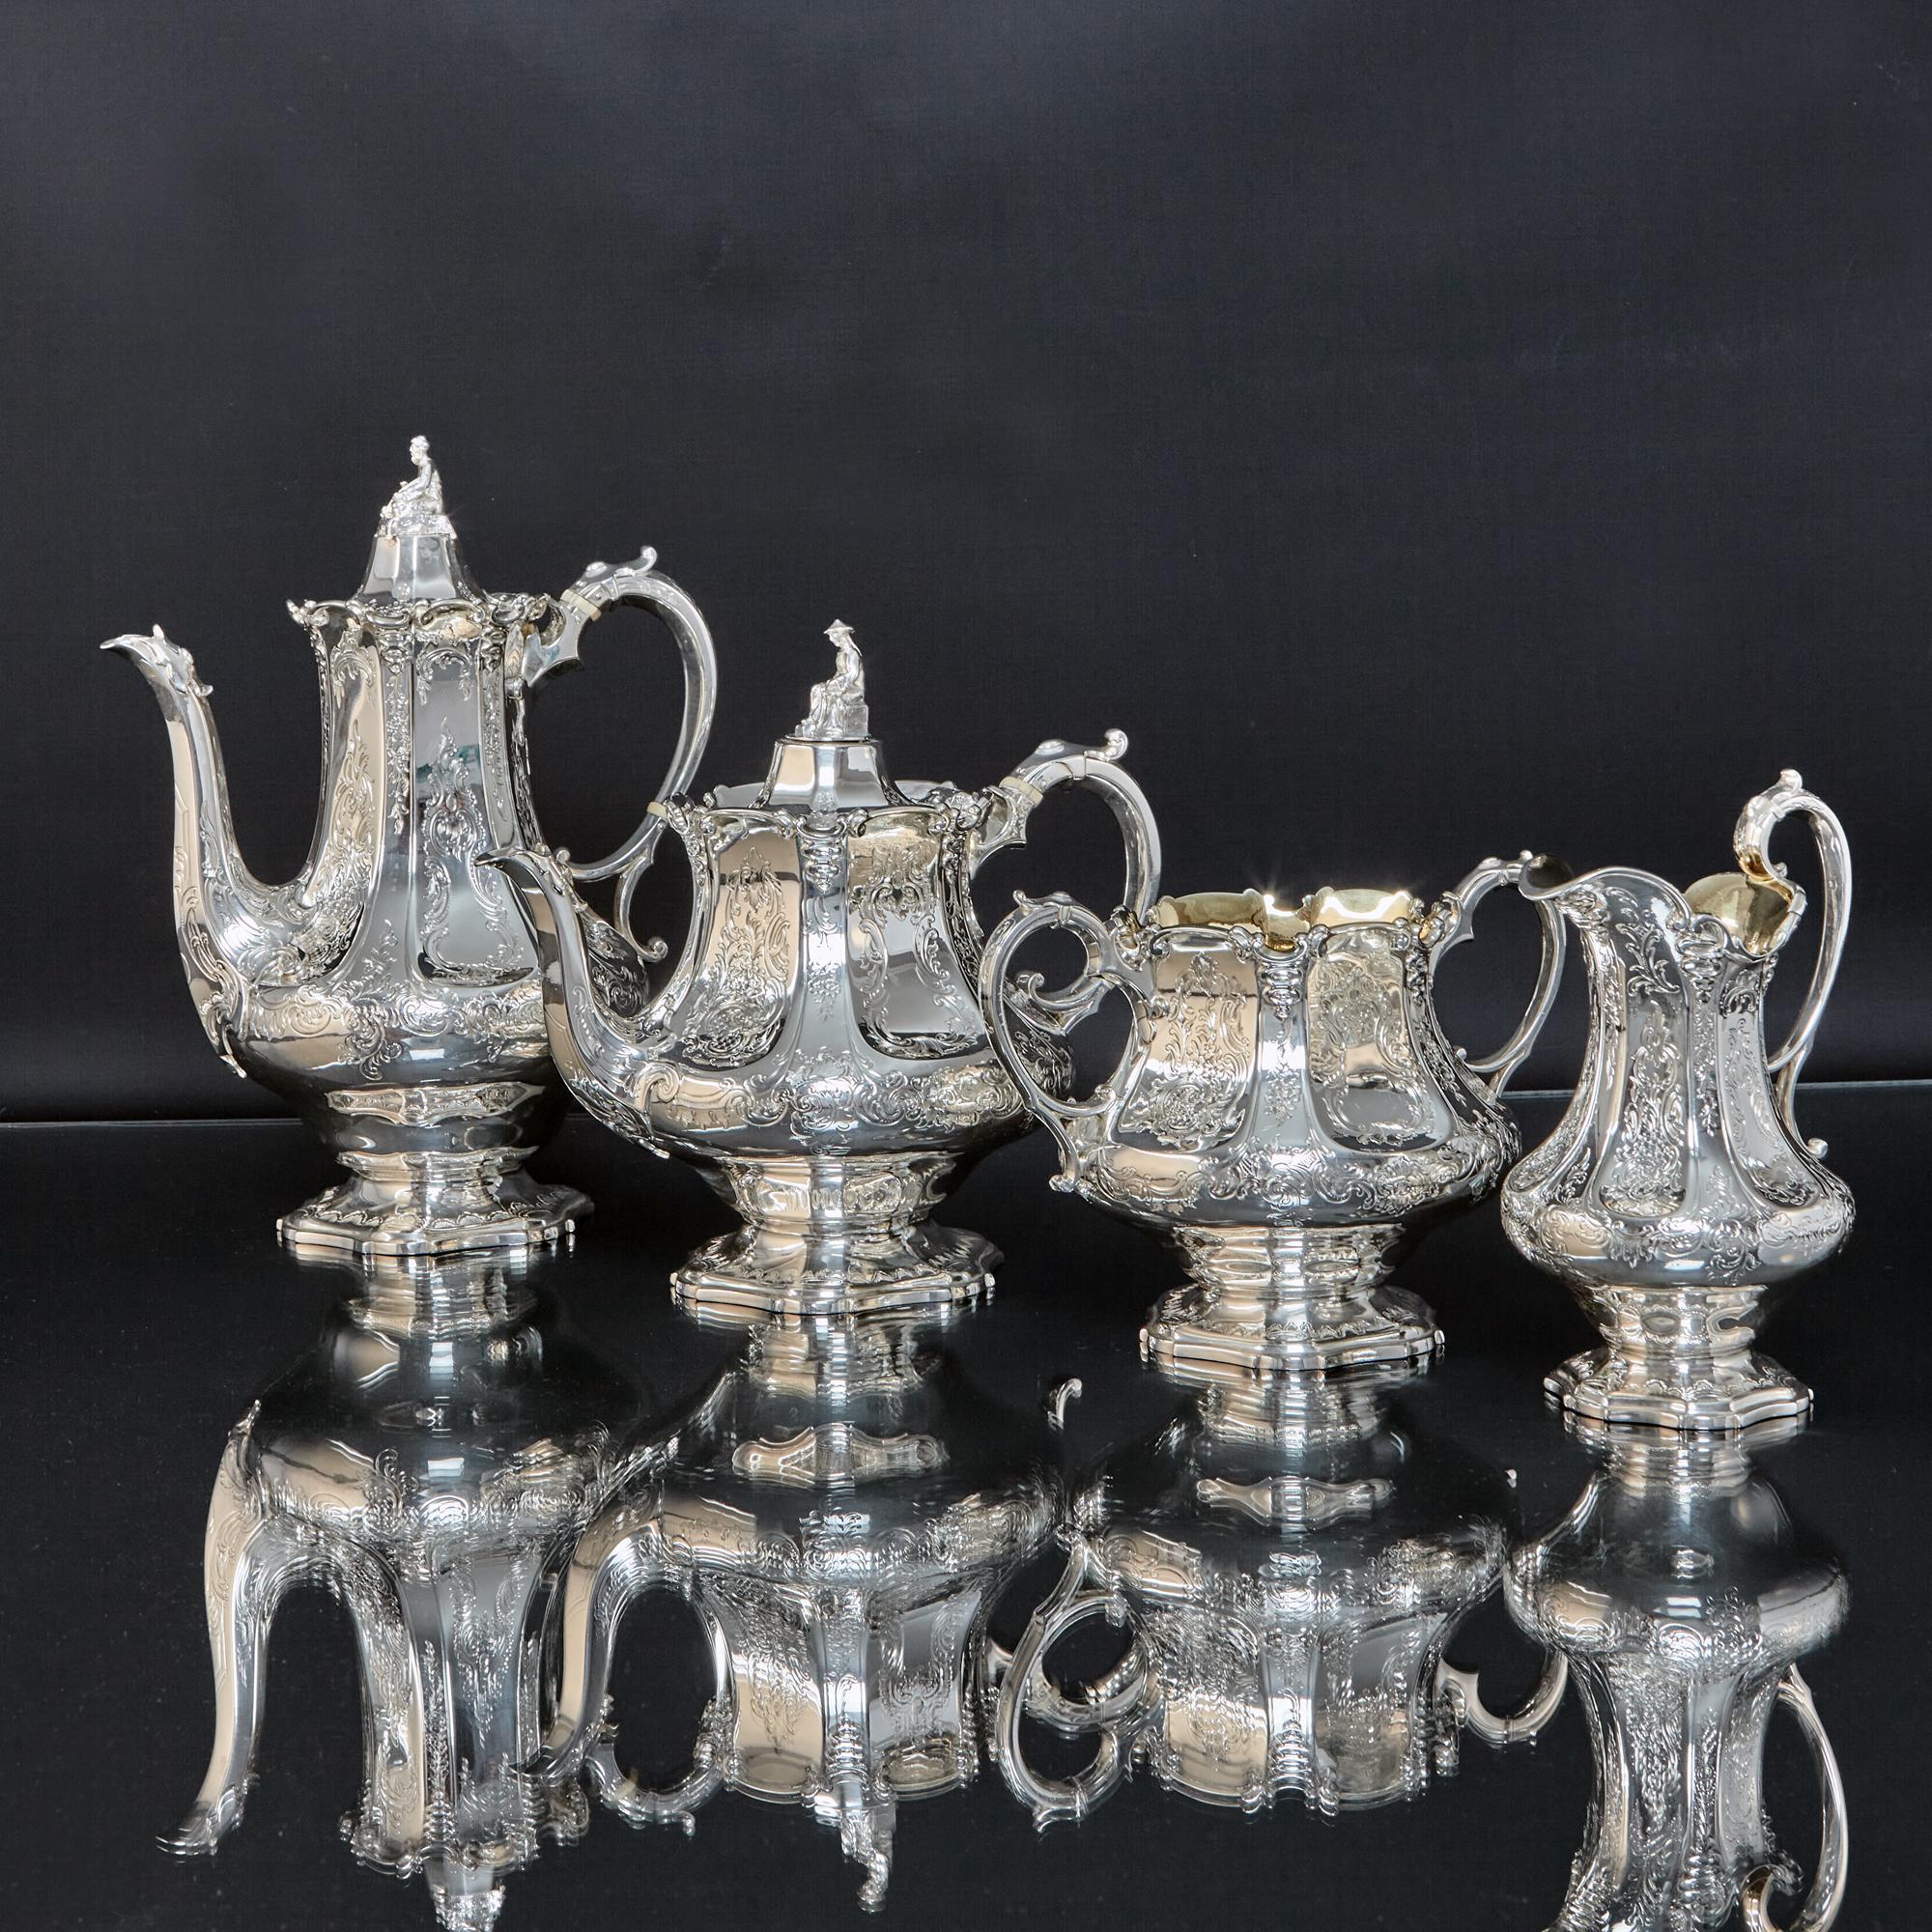 A fine quality antique Victorian silver four piece tea and coffee set in exceptional, original condition. The set comprises a coffee pot, tea pot, milk jug and sugar basin, the latter two pieces have decorative gilded interiors. All have panelled